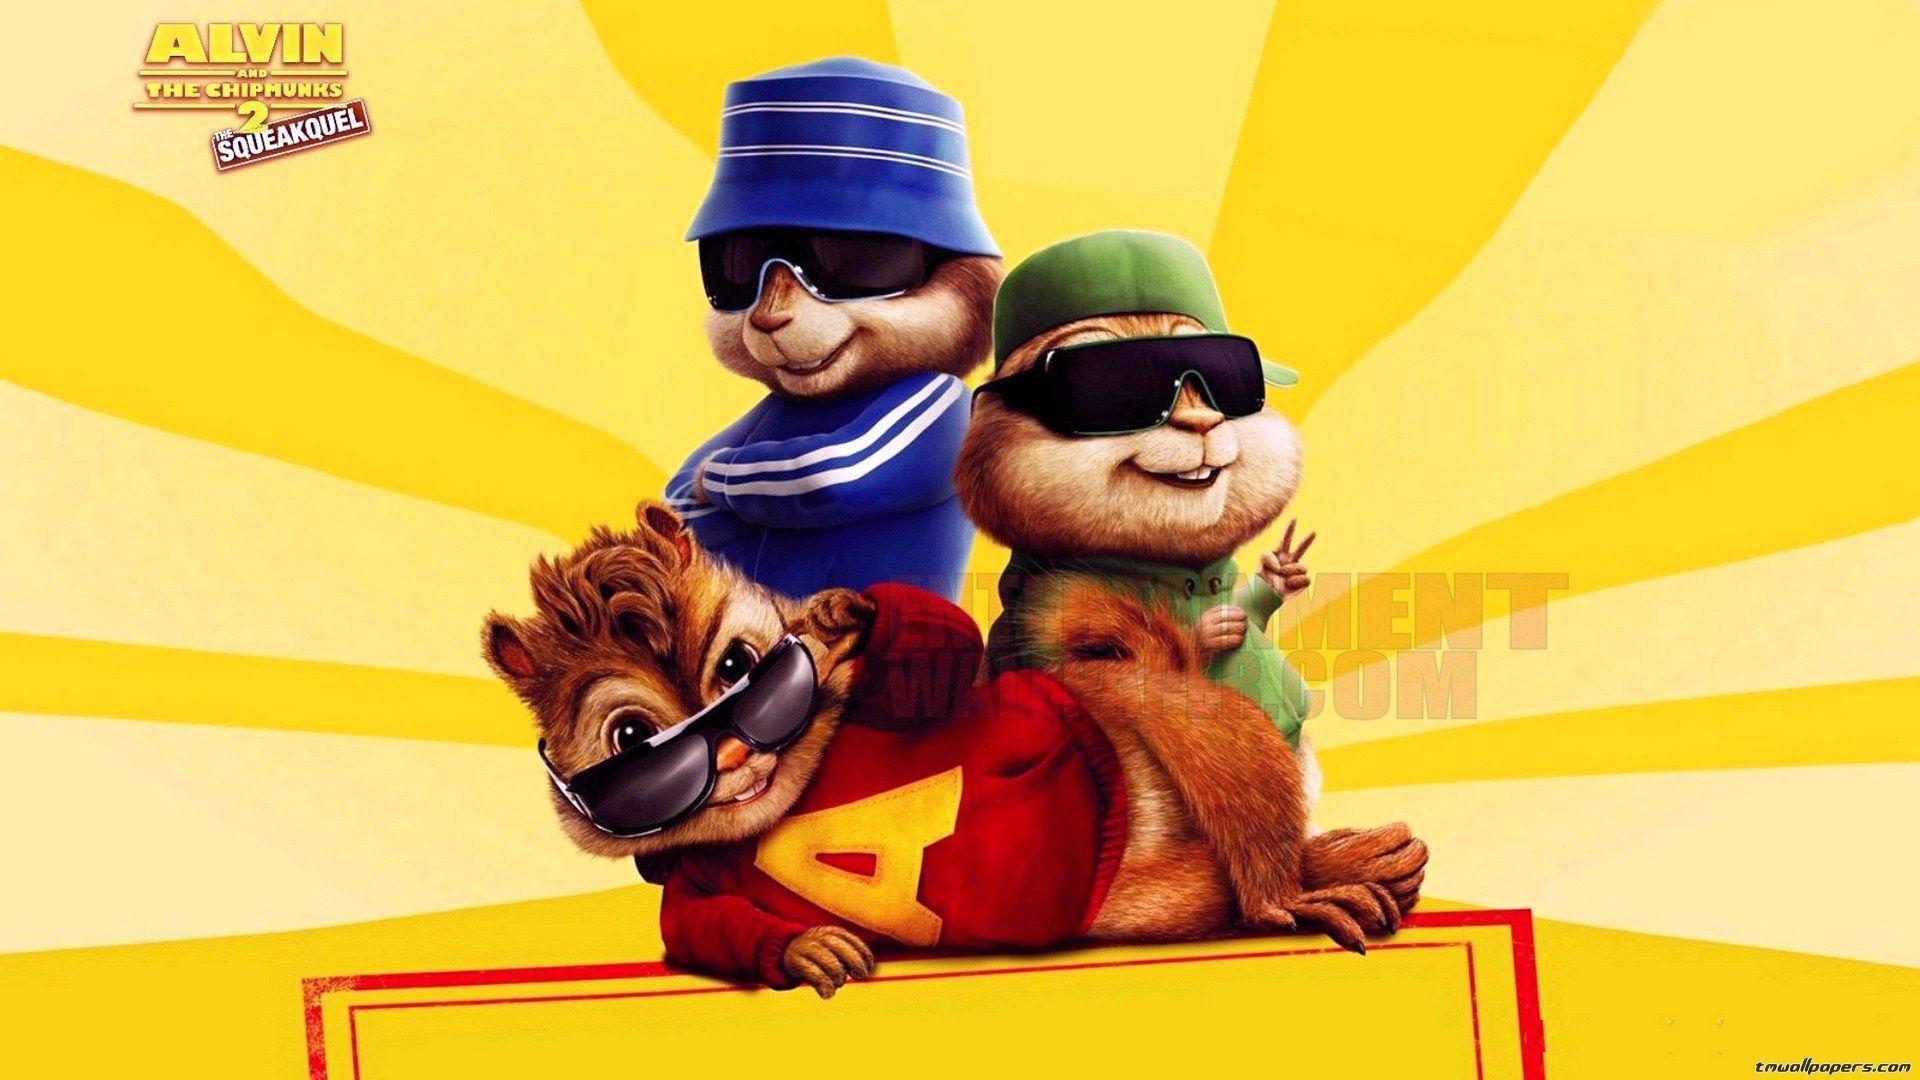 Movie Wallpaper collection and The Chipmunks